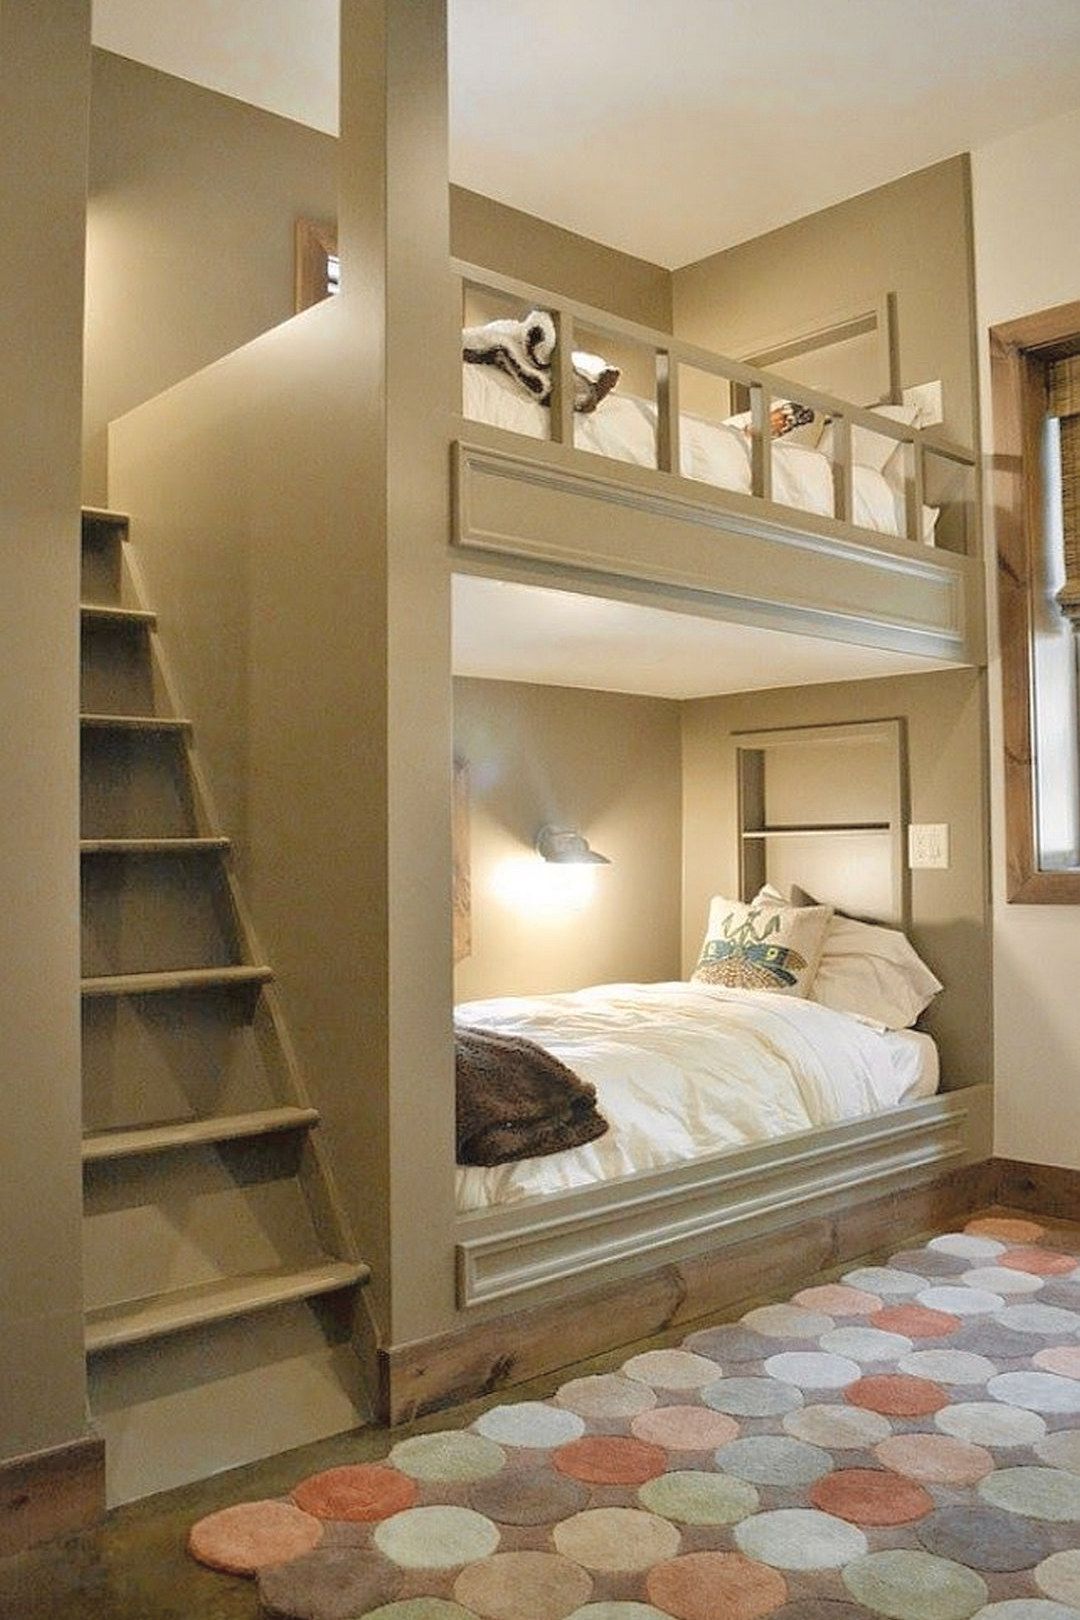 Bunk Bed in Warm Colors